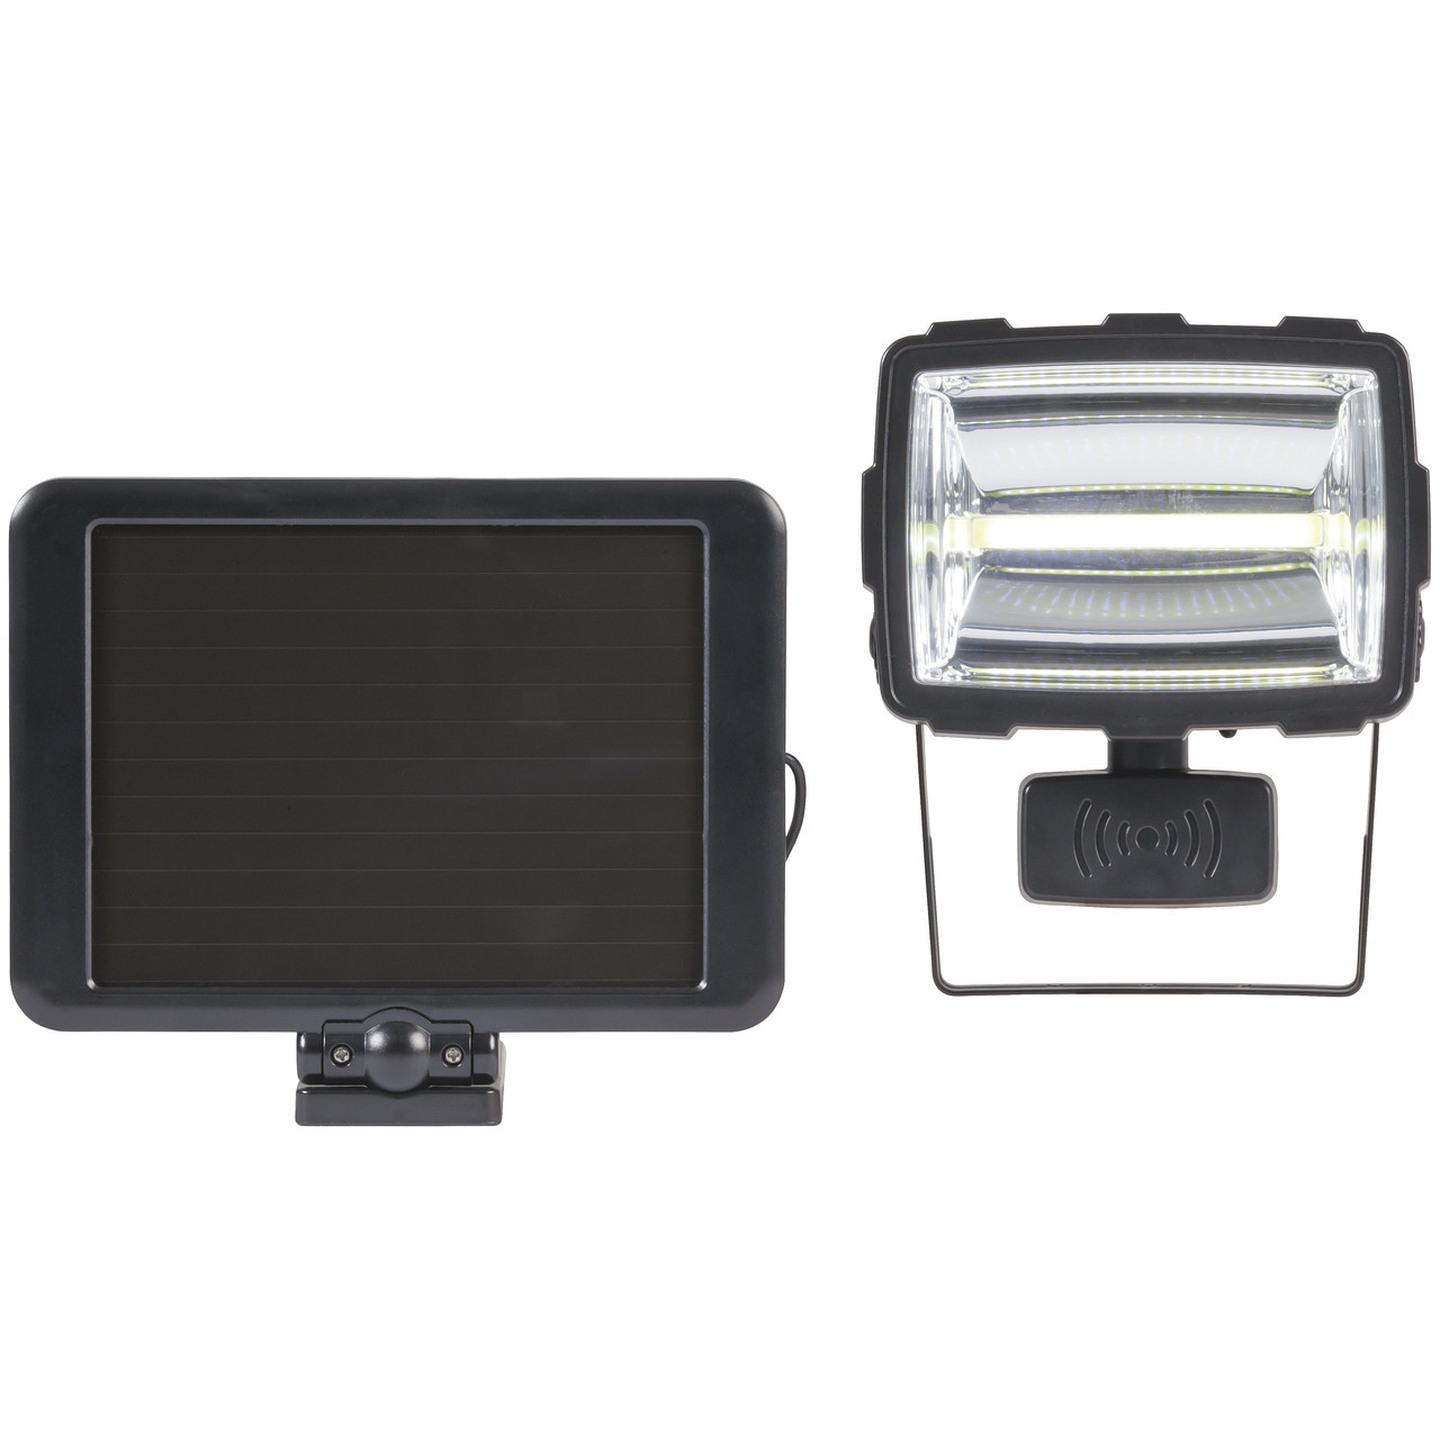 7W Security Light with Solar Recharging